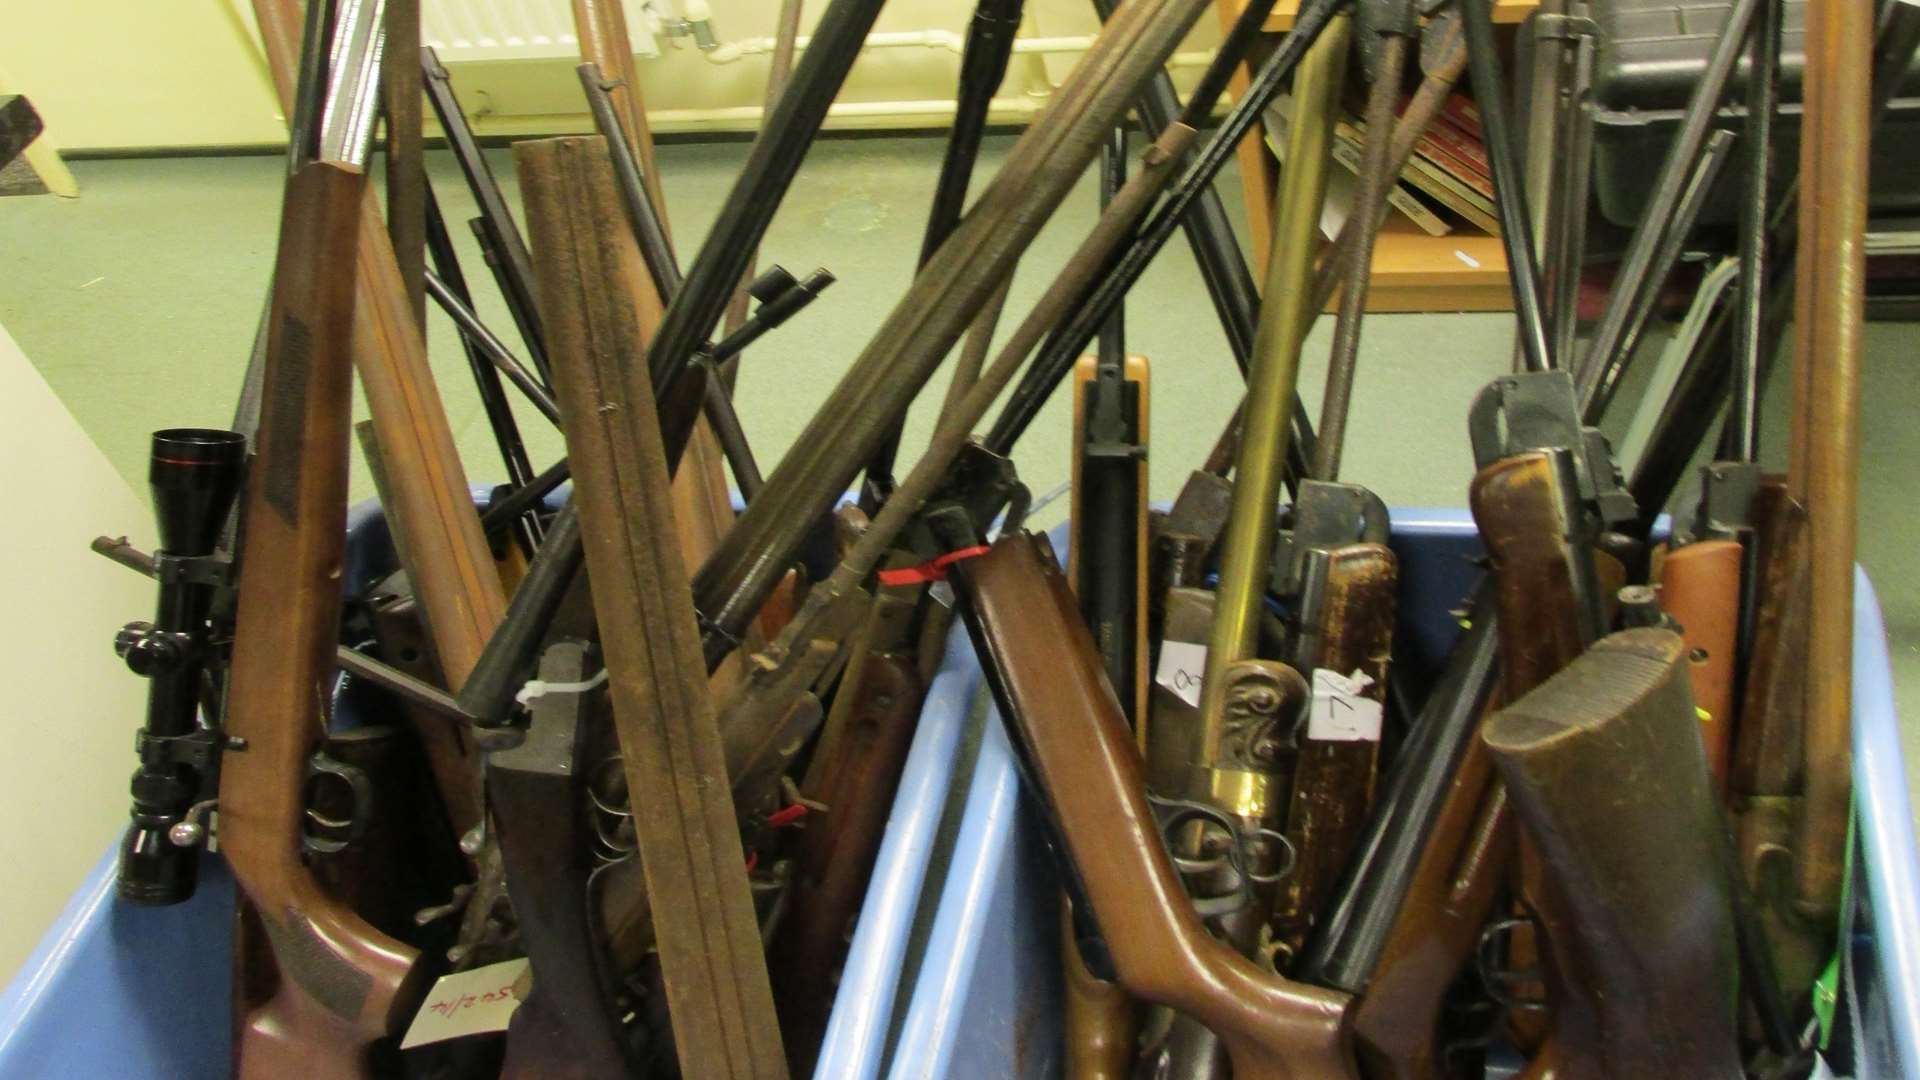 Some of the weapons seized in Kent Police's surrender